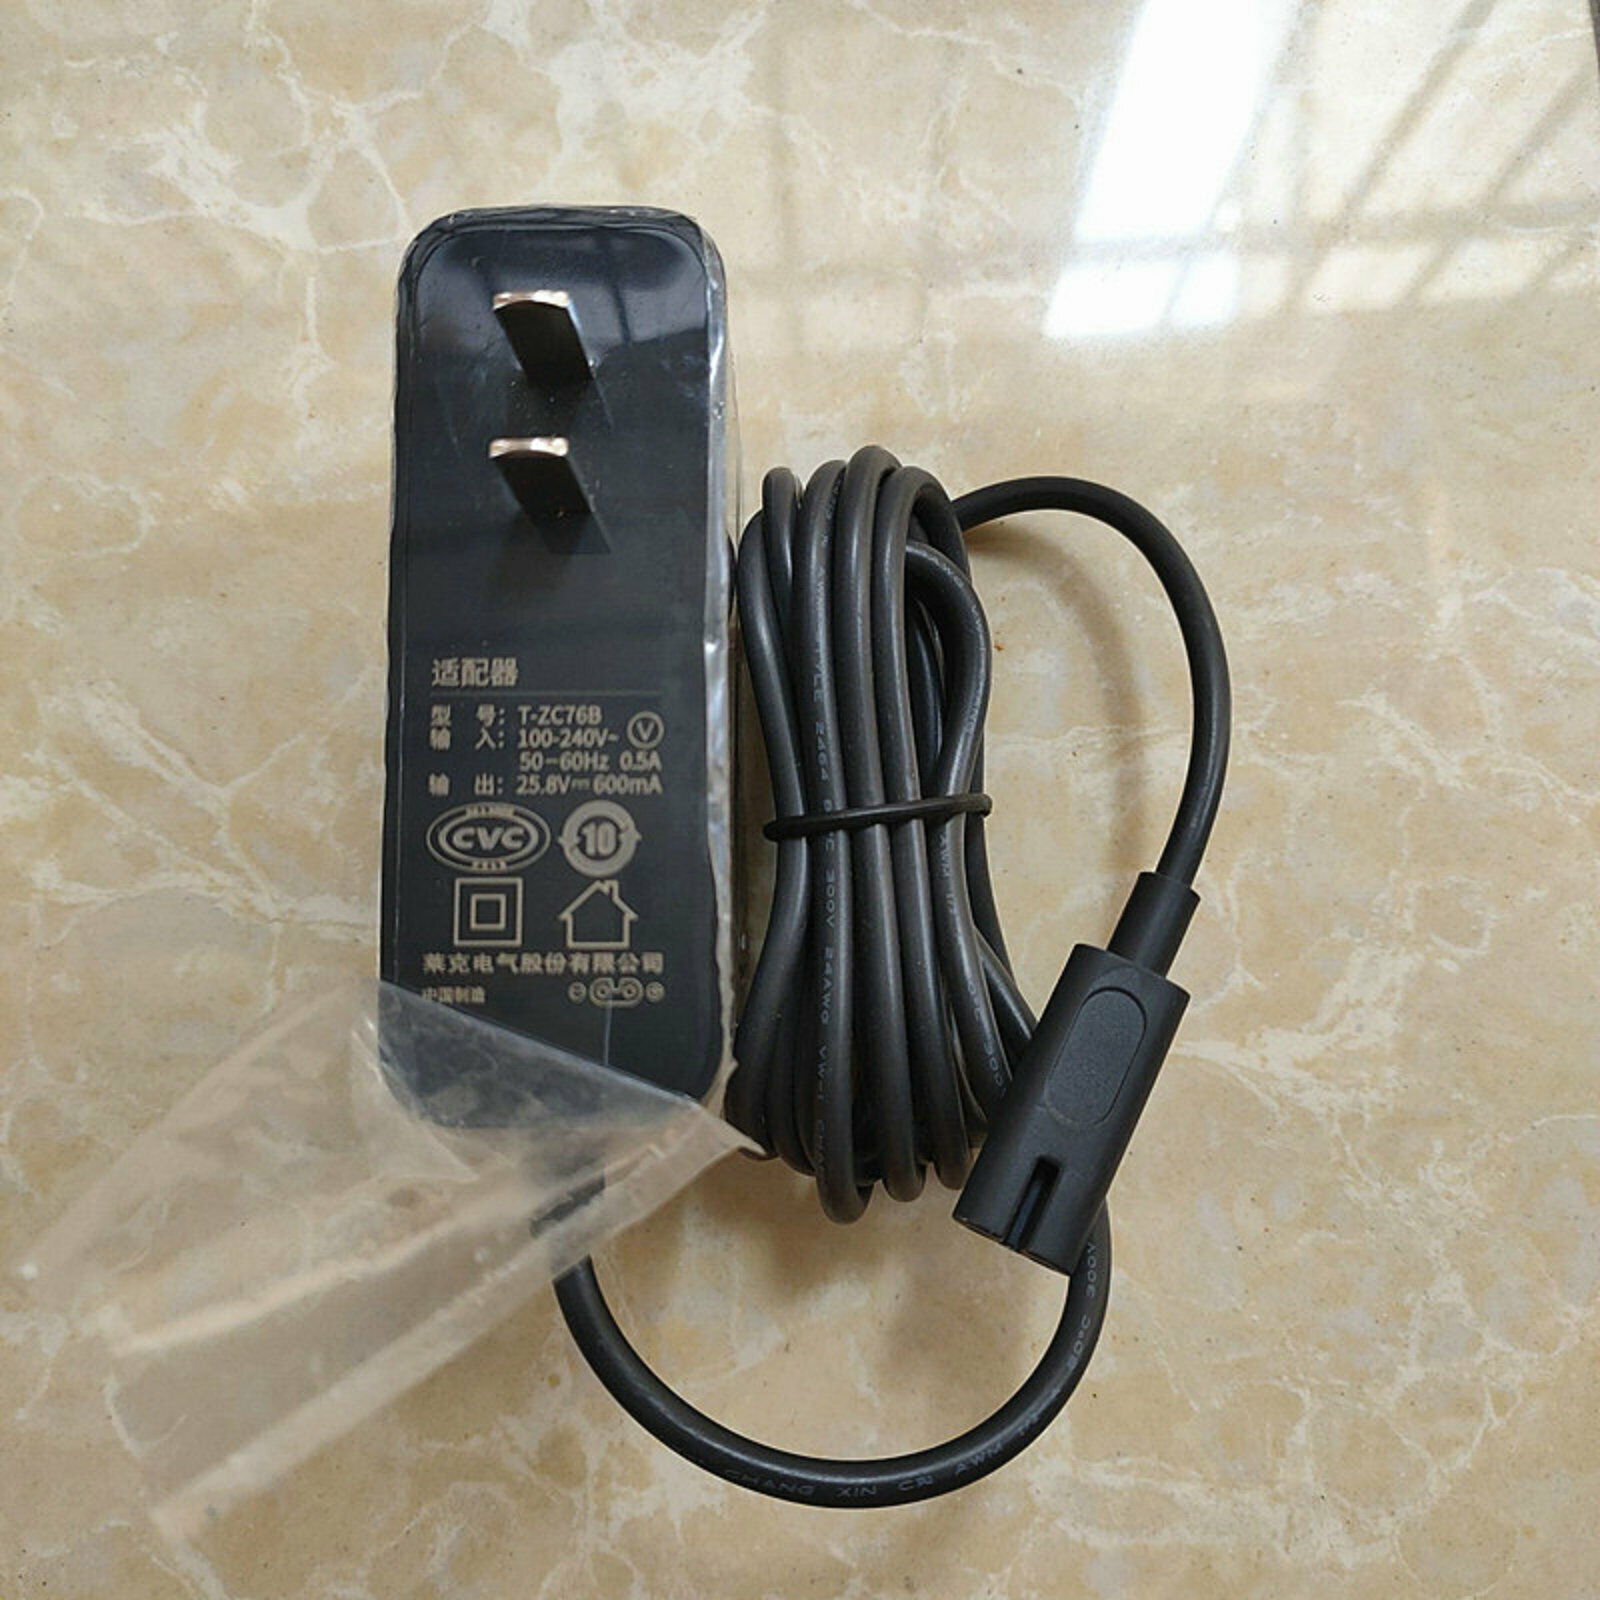 1pcs New AC Adapter Power Charger For JIMMY T-ZC76B 25.8V 600MA 1pcs New AC Adapter Power Charger For JIMMY T-ZC76B 25.